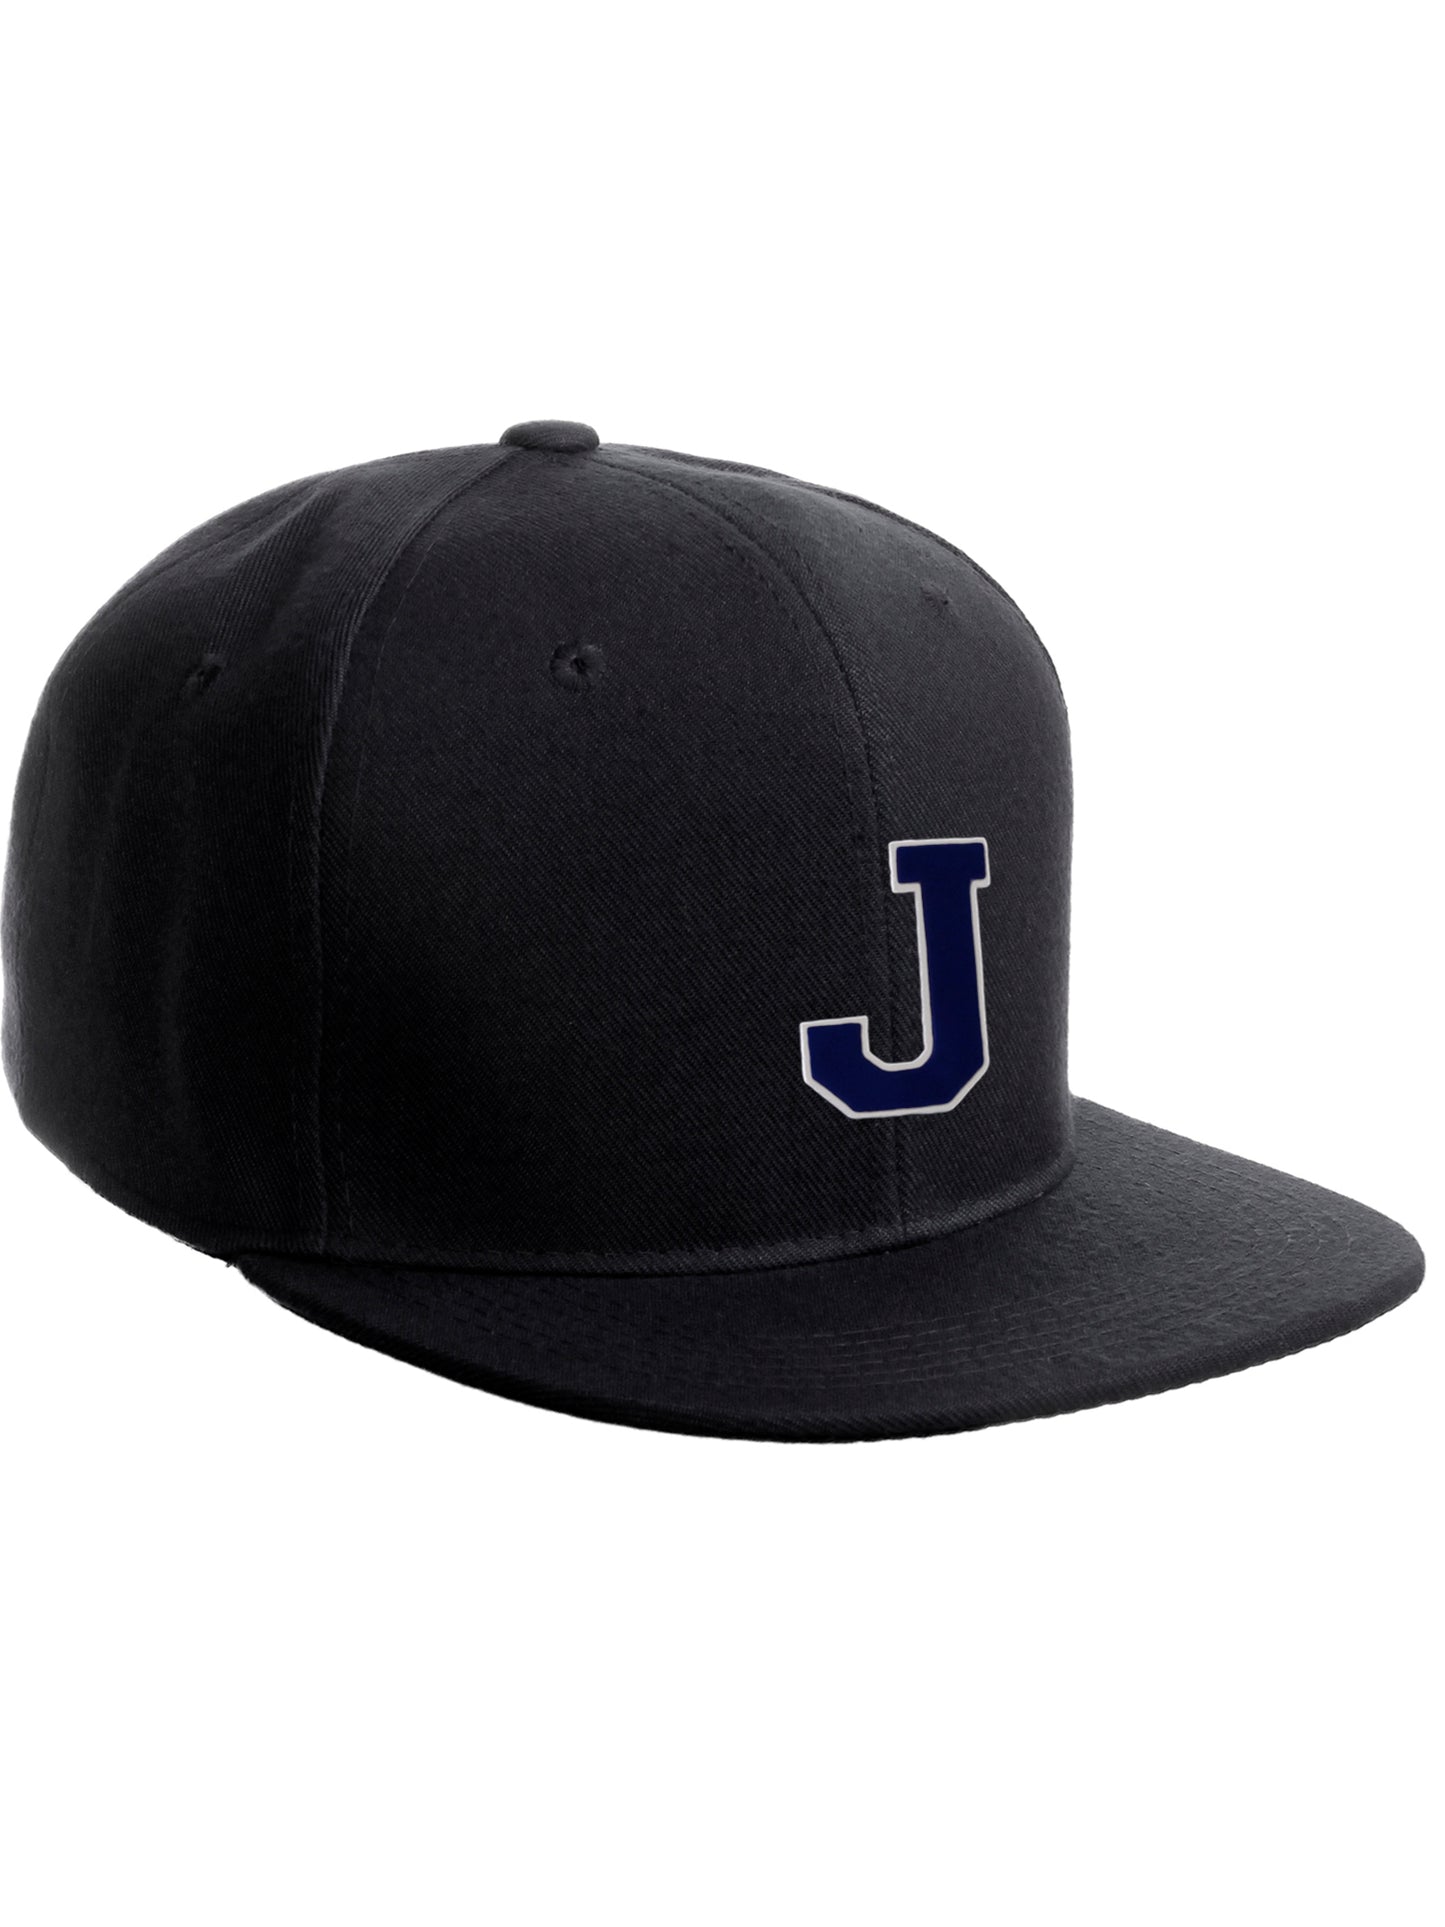 Classic Snapback Hat Custom A to Z Initial Raised Letter, Black Cap White Navy